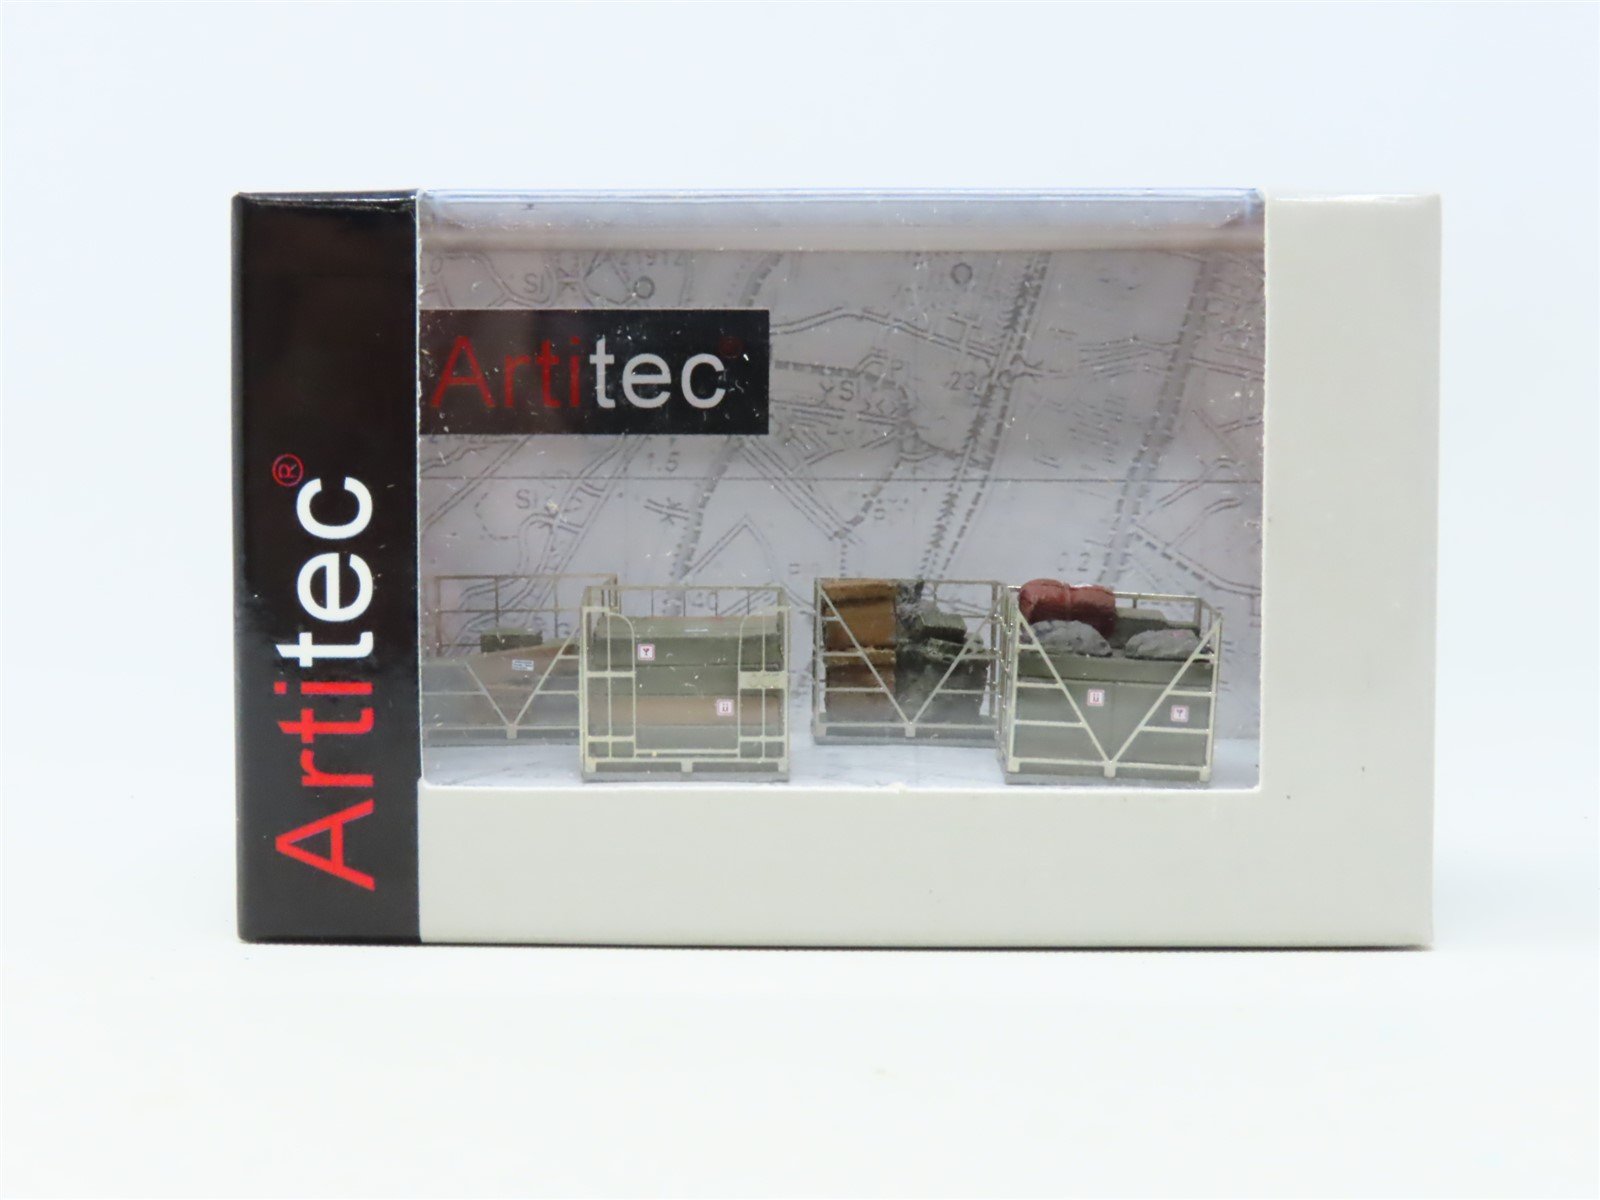 HO 1/87 Scale Artitec #387.222 Metal Cage Containers on Pallets